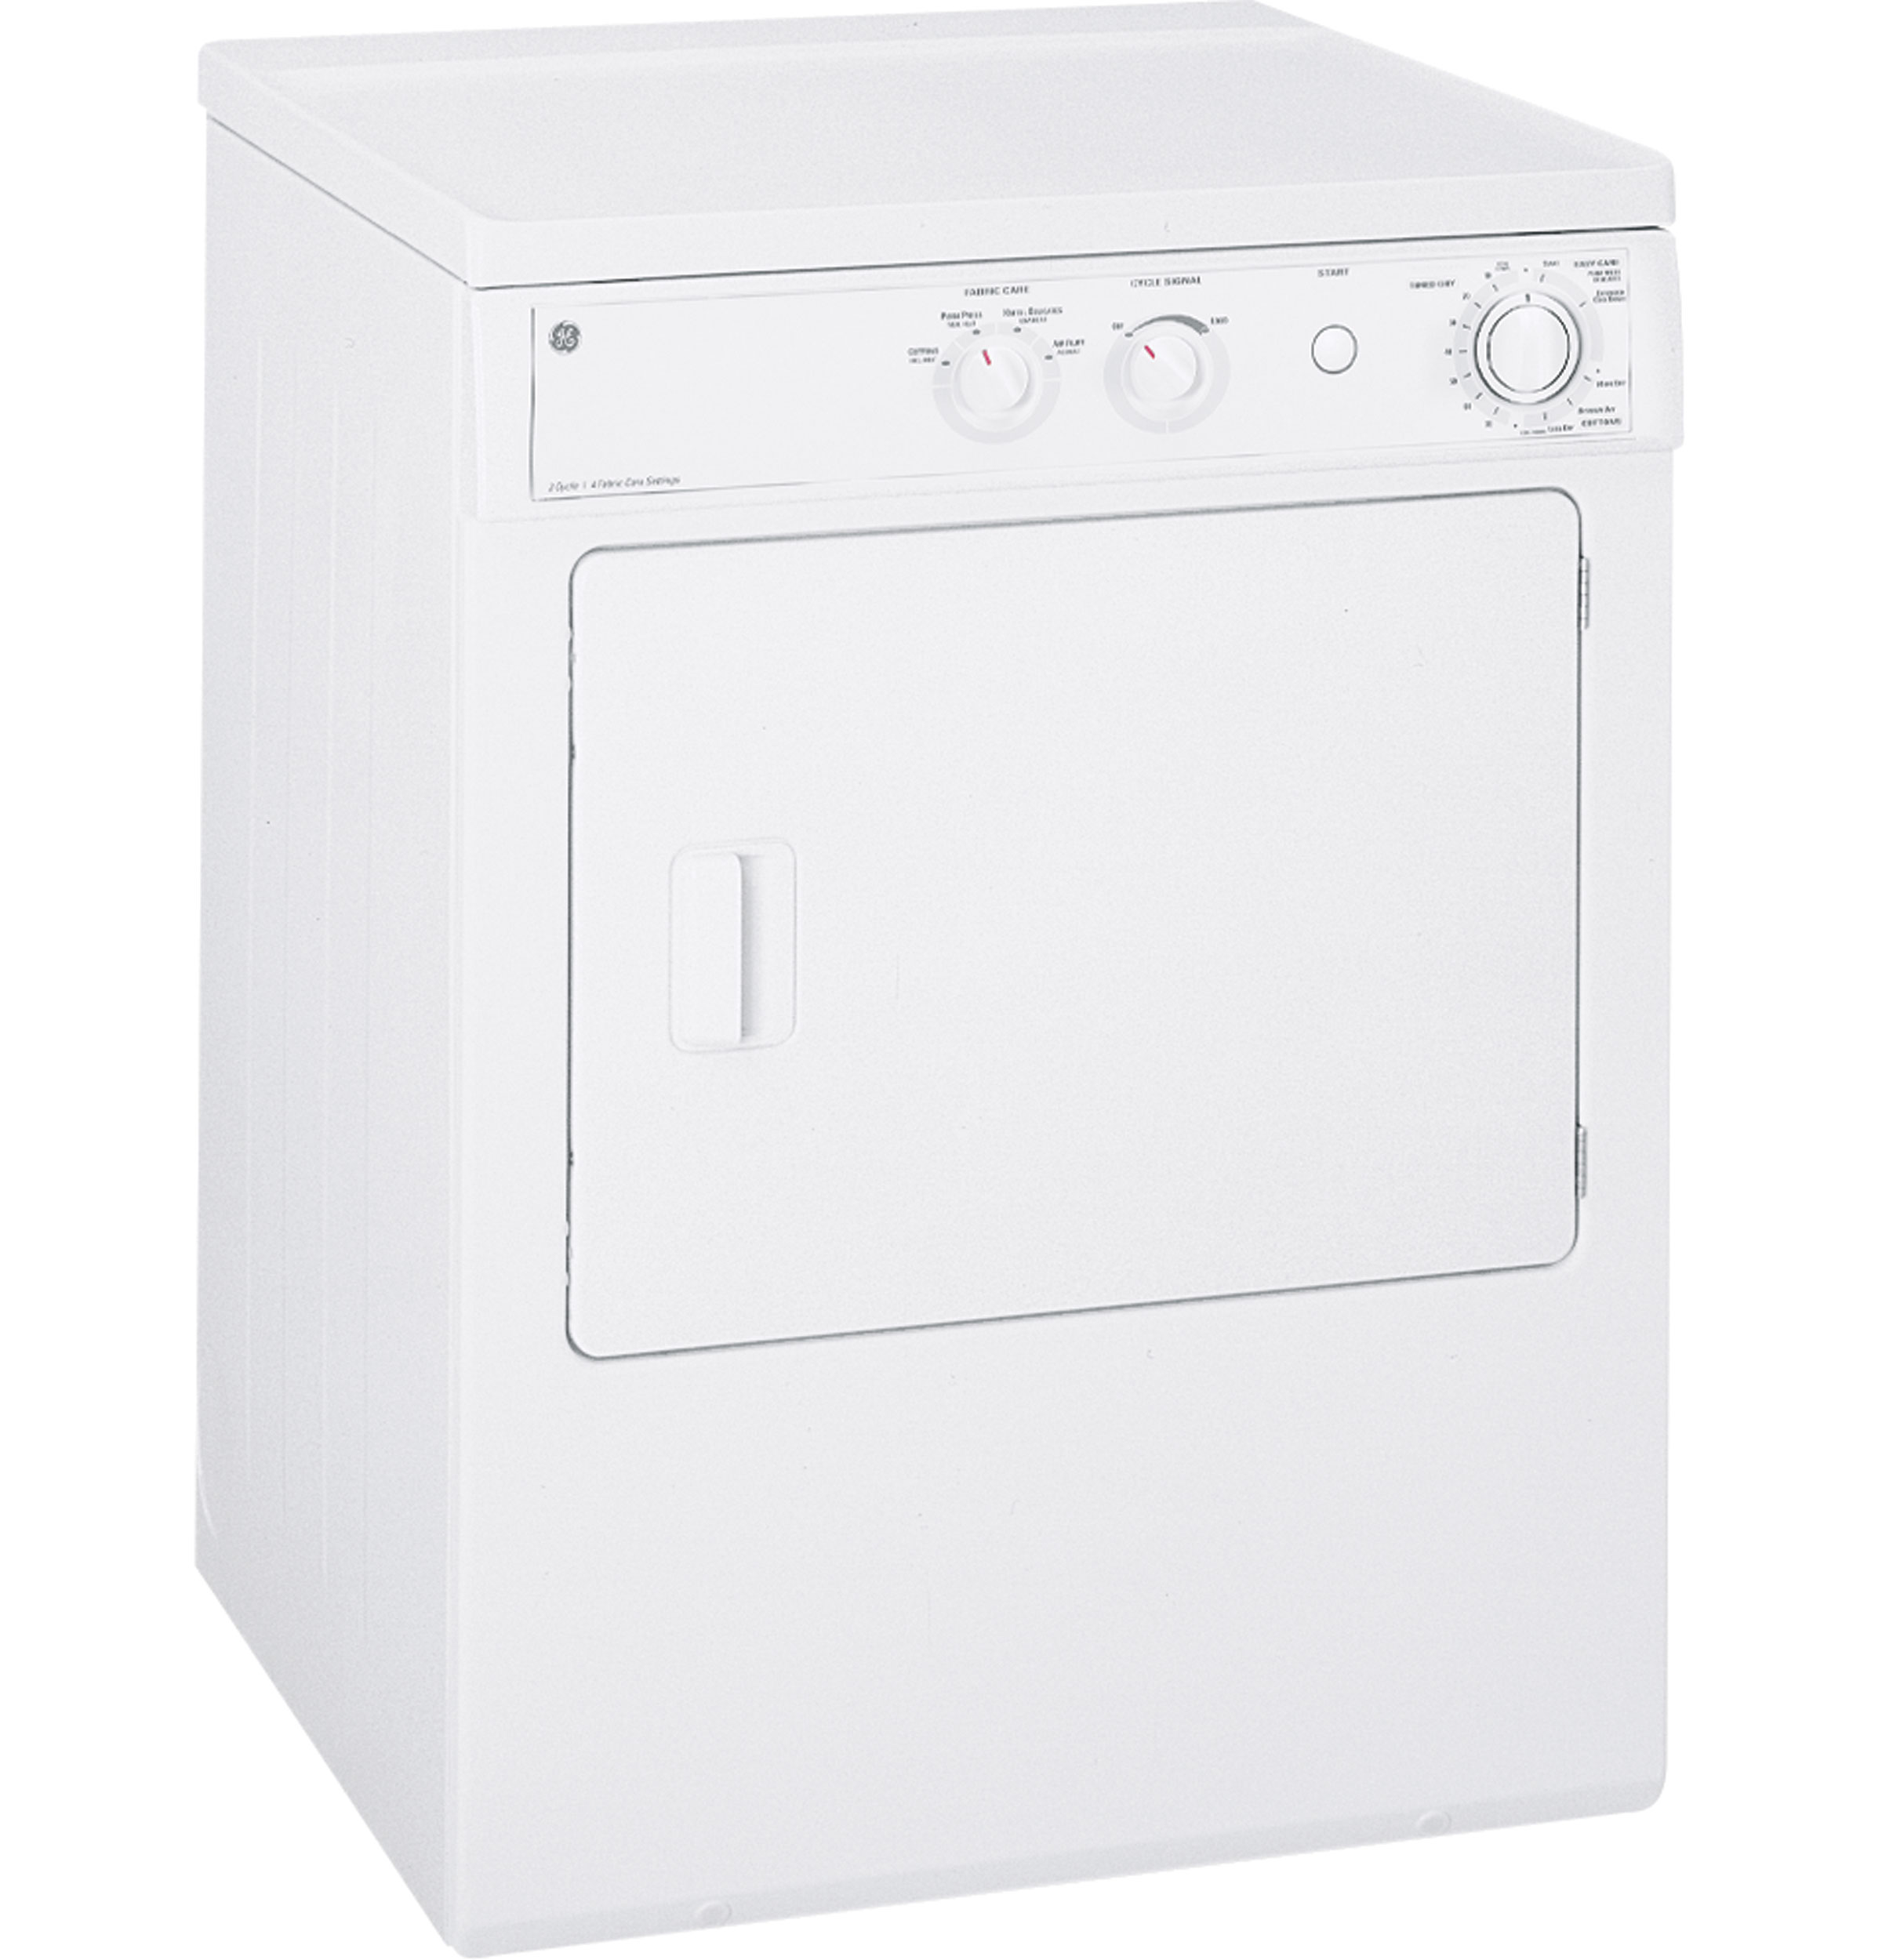 GE® 5.7 Cu. Ft. Extra-Large Capacity Frontload Electric Dryer